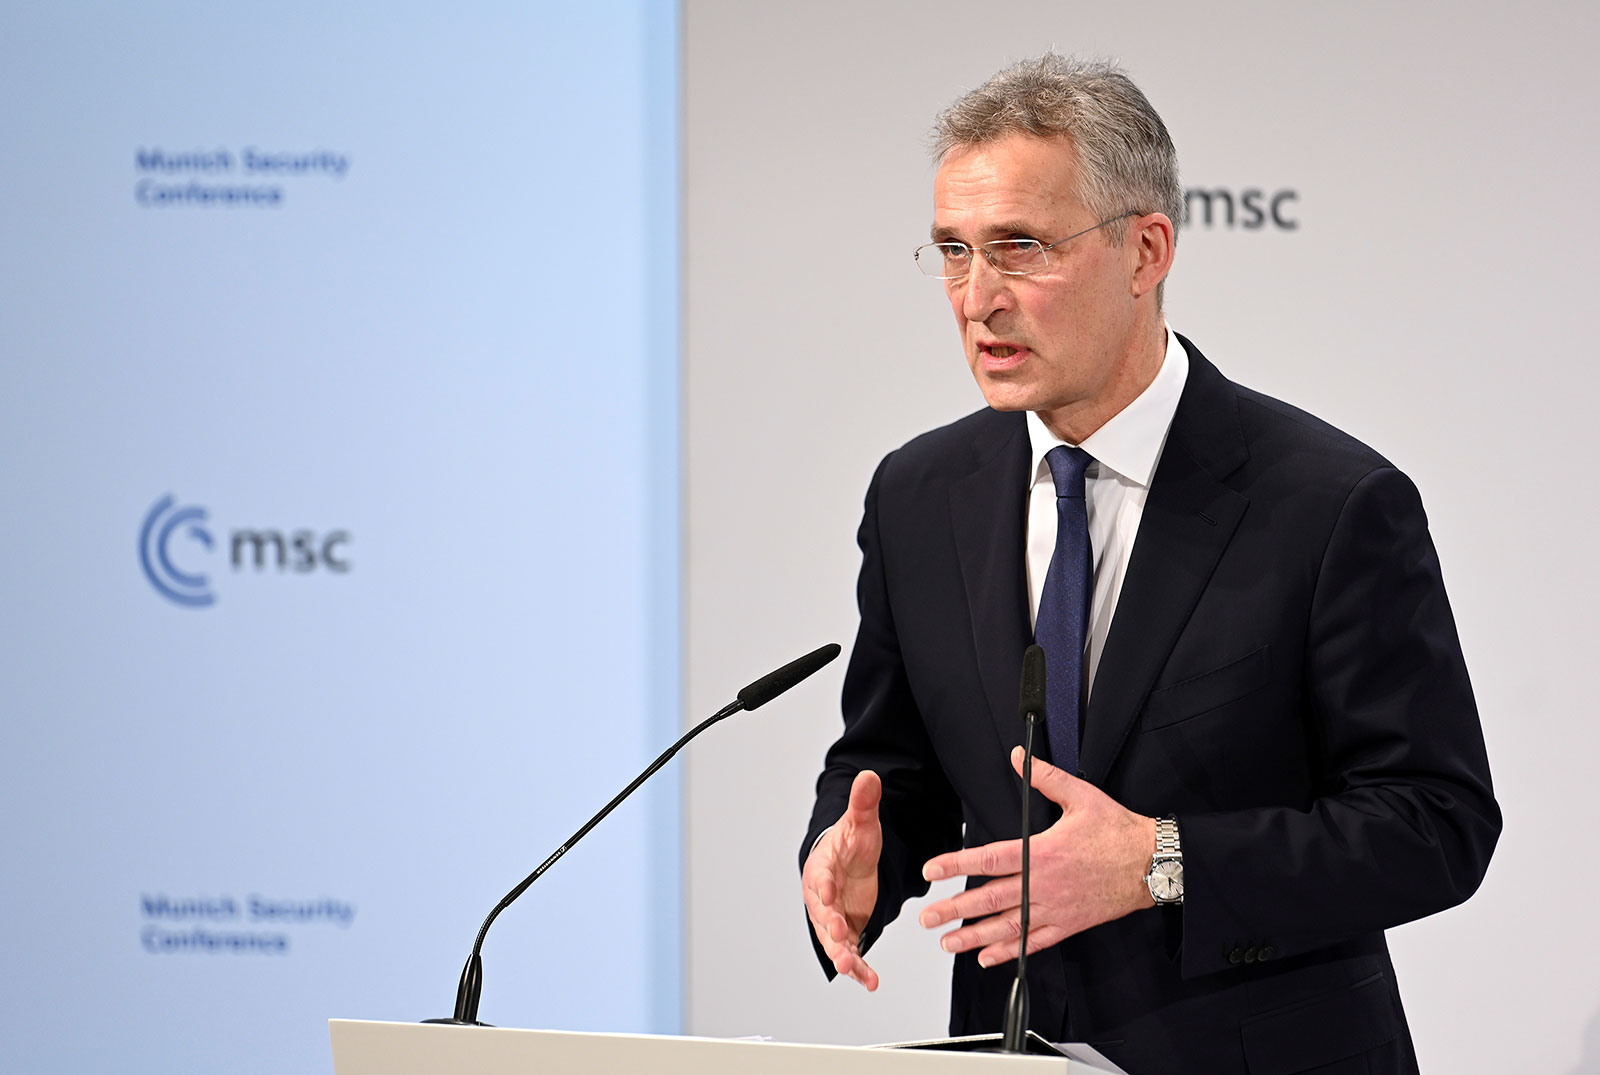 NATO Secretary General Jens Stoltenberg speaks at the Munich Security Conference on February 18.